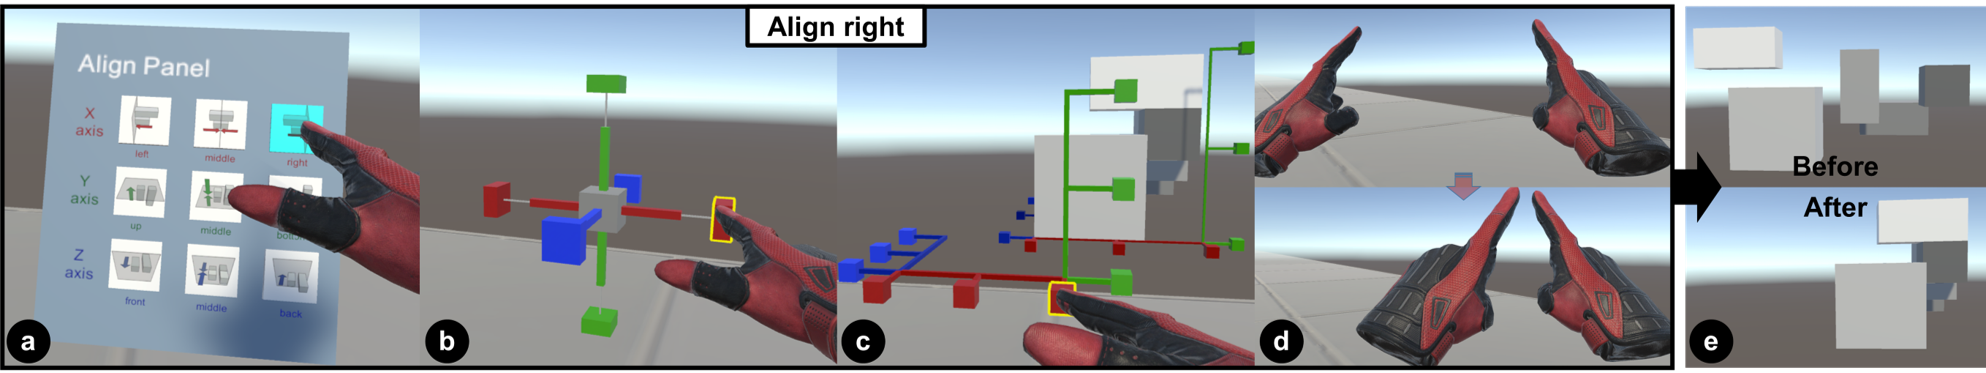 Group-based Object Alignment in Virtual Reality Environments